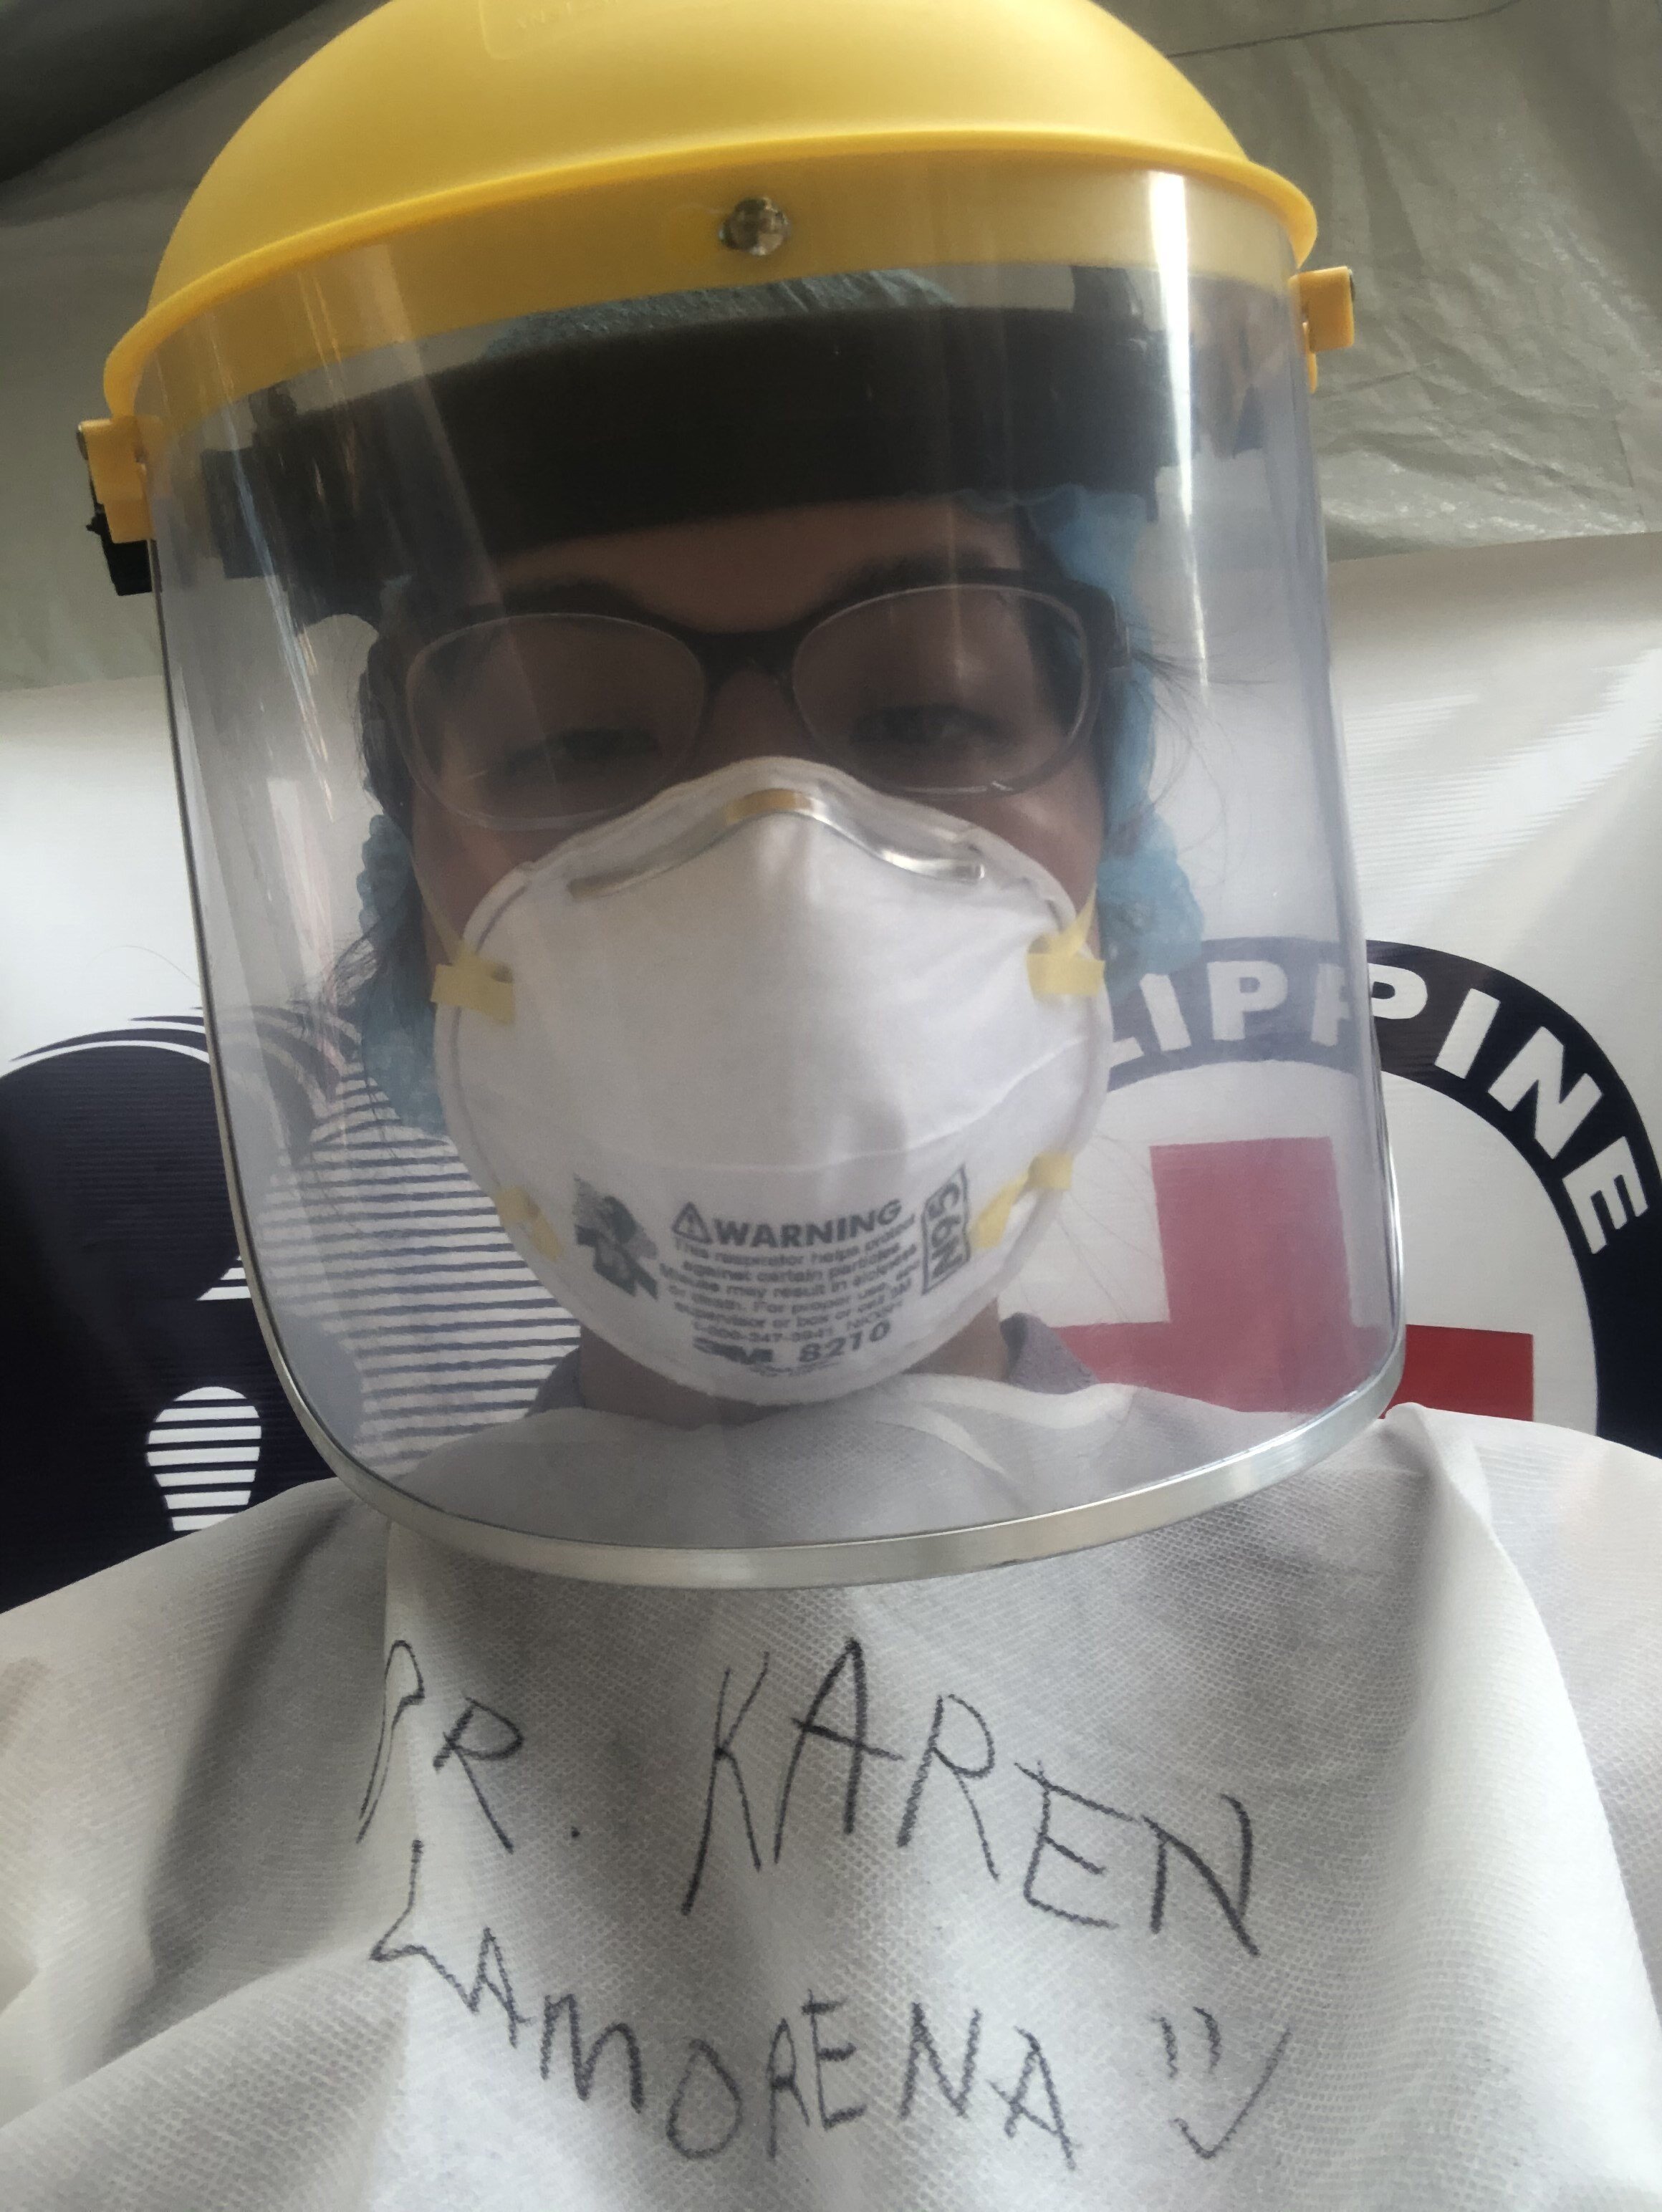 In her PPE.